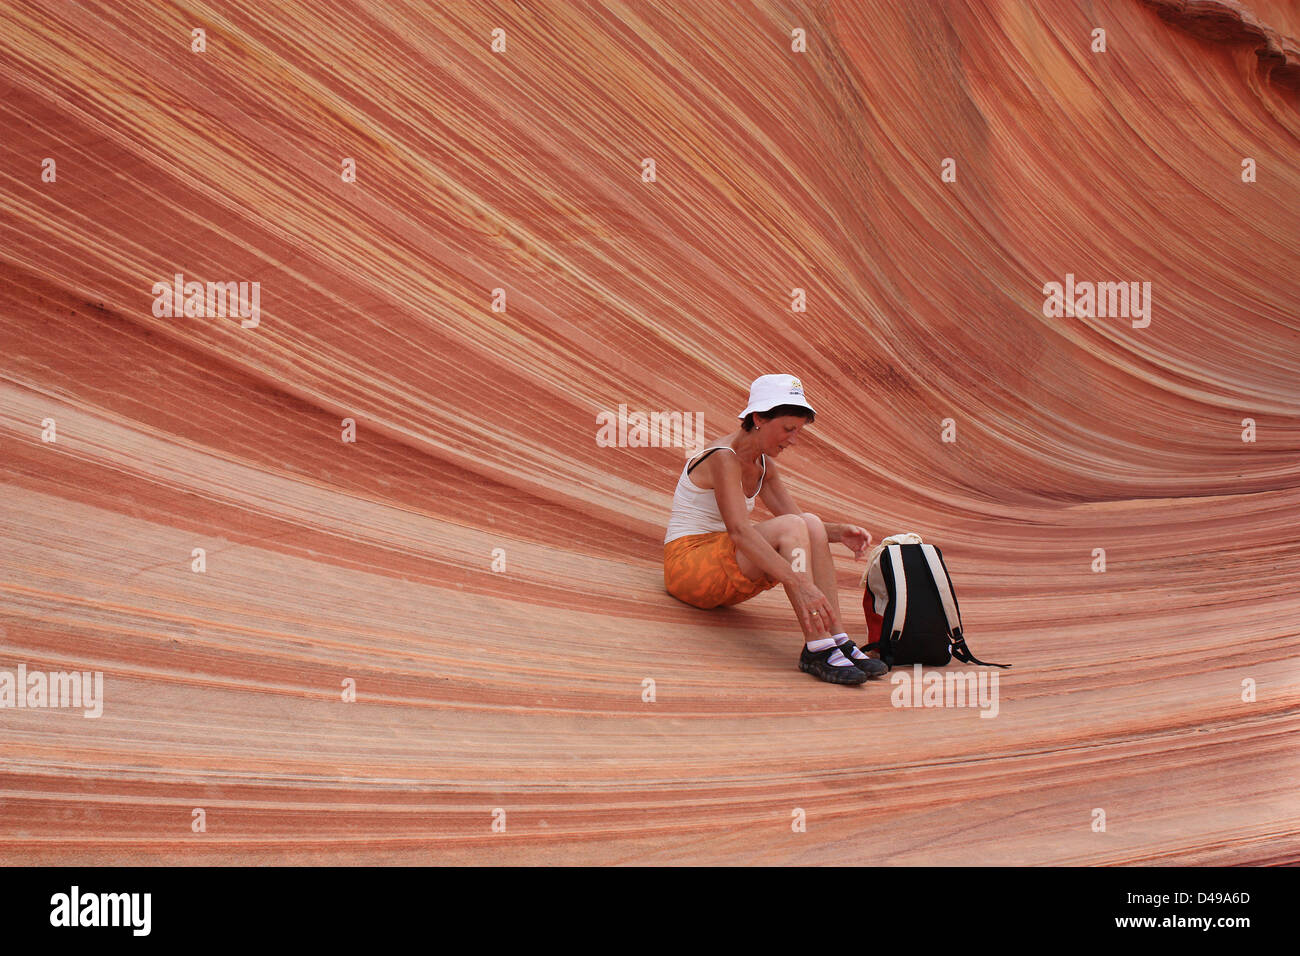 The Wave, Coyote Buttes in Paria Canyon-Vermillion cliffs wilderness,Arizona, United States Stock Photo